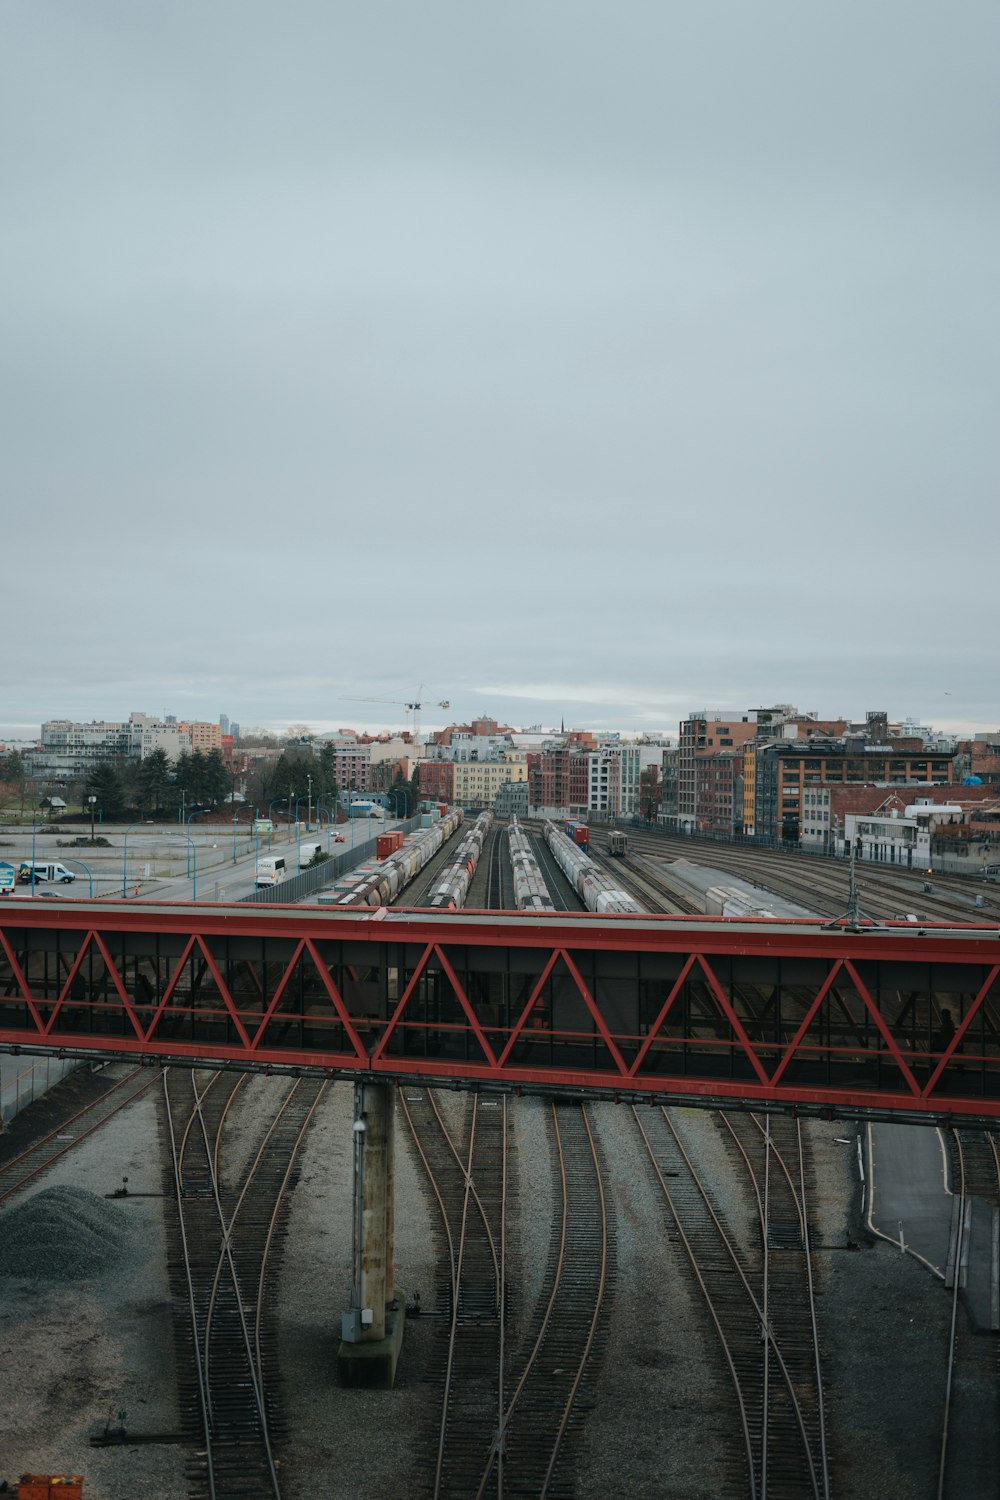 a train track with a city in the background